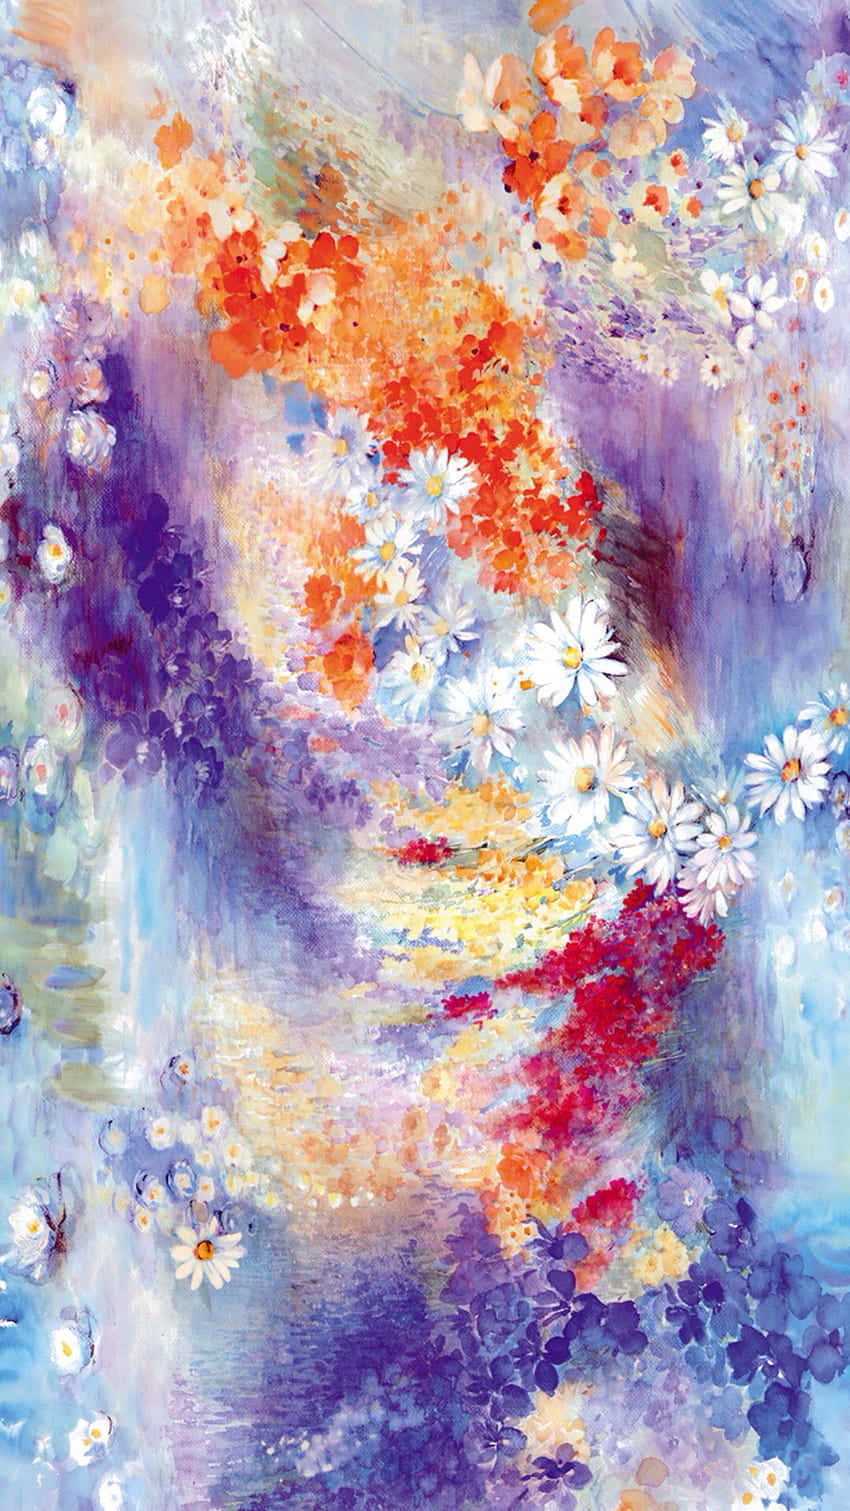 Experience true peace as you paint with watercolor on your iPhone Wallpaper